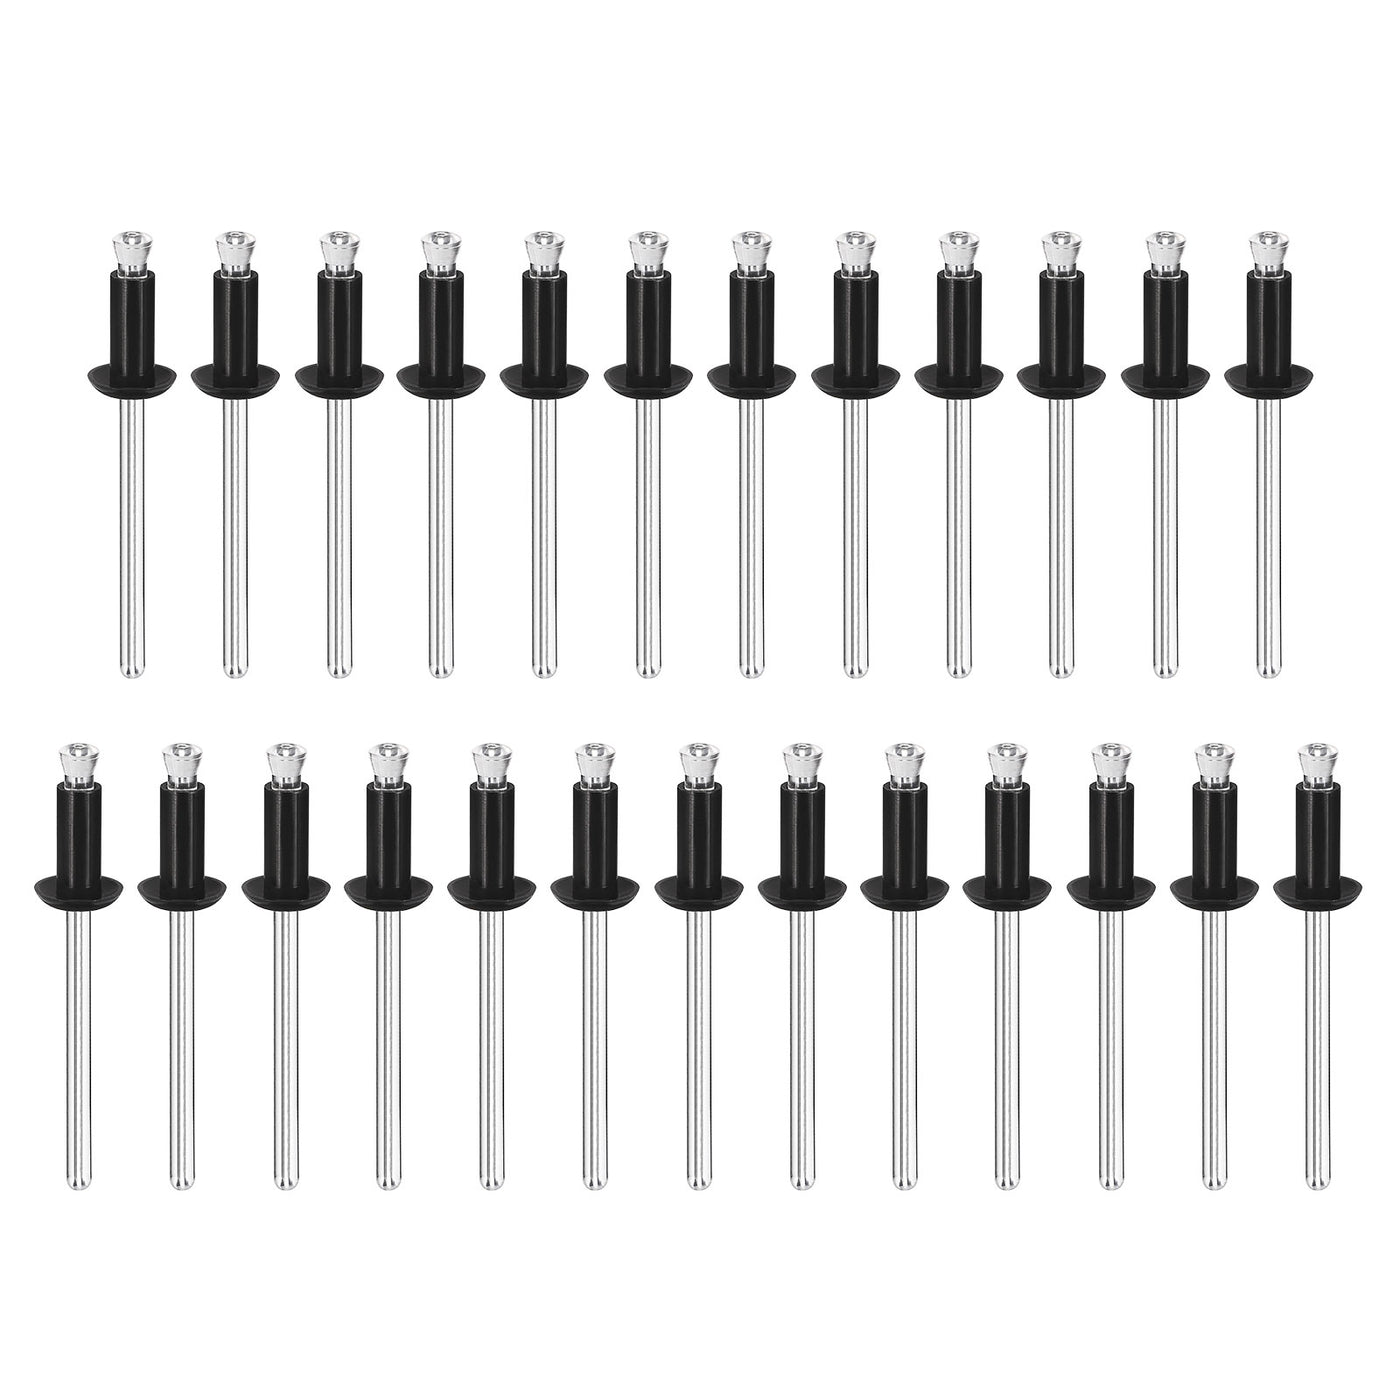 uxcell Uxcell 4.8mm x 11.2mm Nylon Blind Rivets for PC Board Bumper Trim Retainer, Black 50Pcs